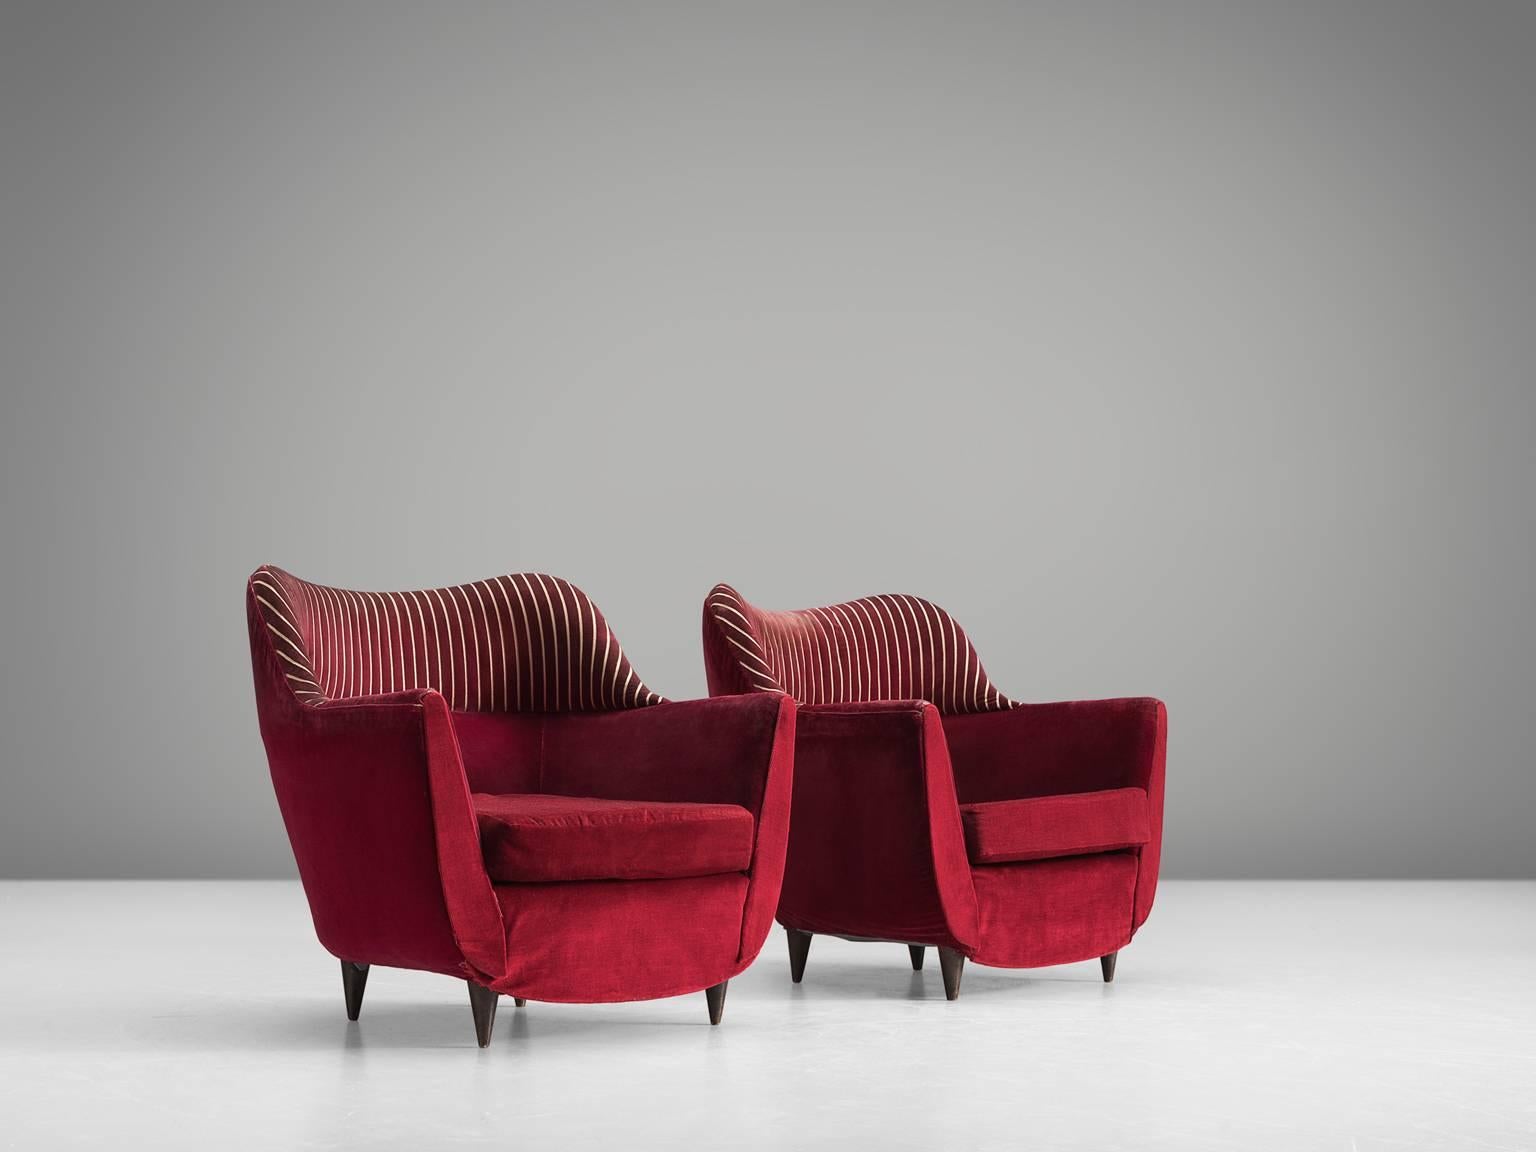 Set of armchairs, red fabric, wood, Italy, 1950s.

This set of lounge chairs is both voluptuous and grand as they are comfortable. The chairs have semi high wingbacks and feature deep red upholstery with golden vertical stripes on the top and small